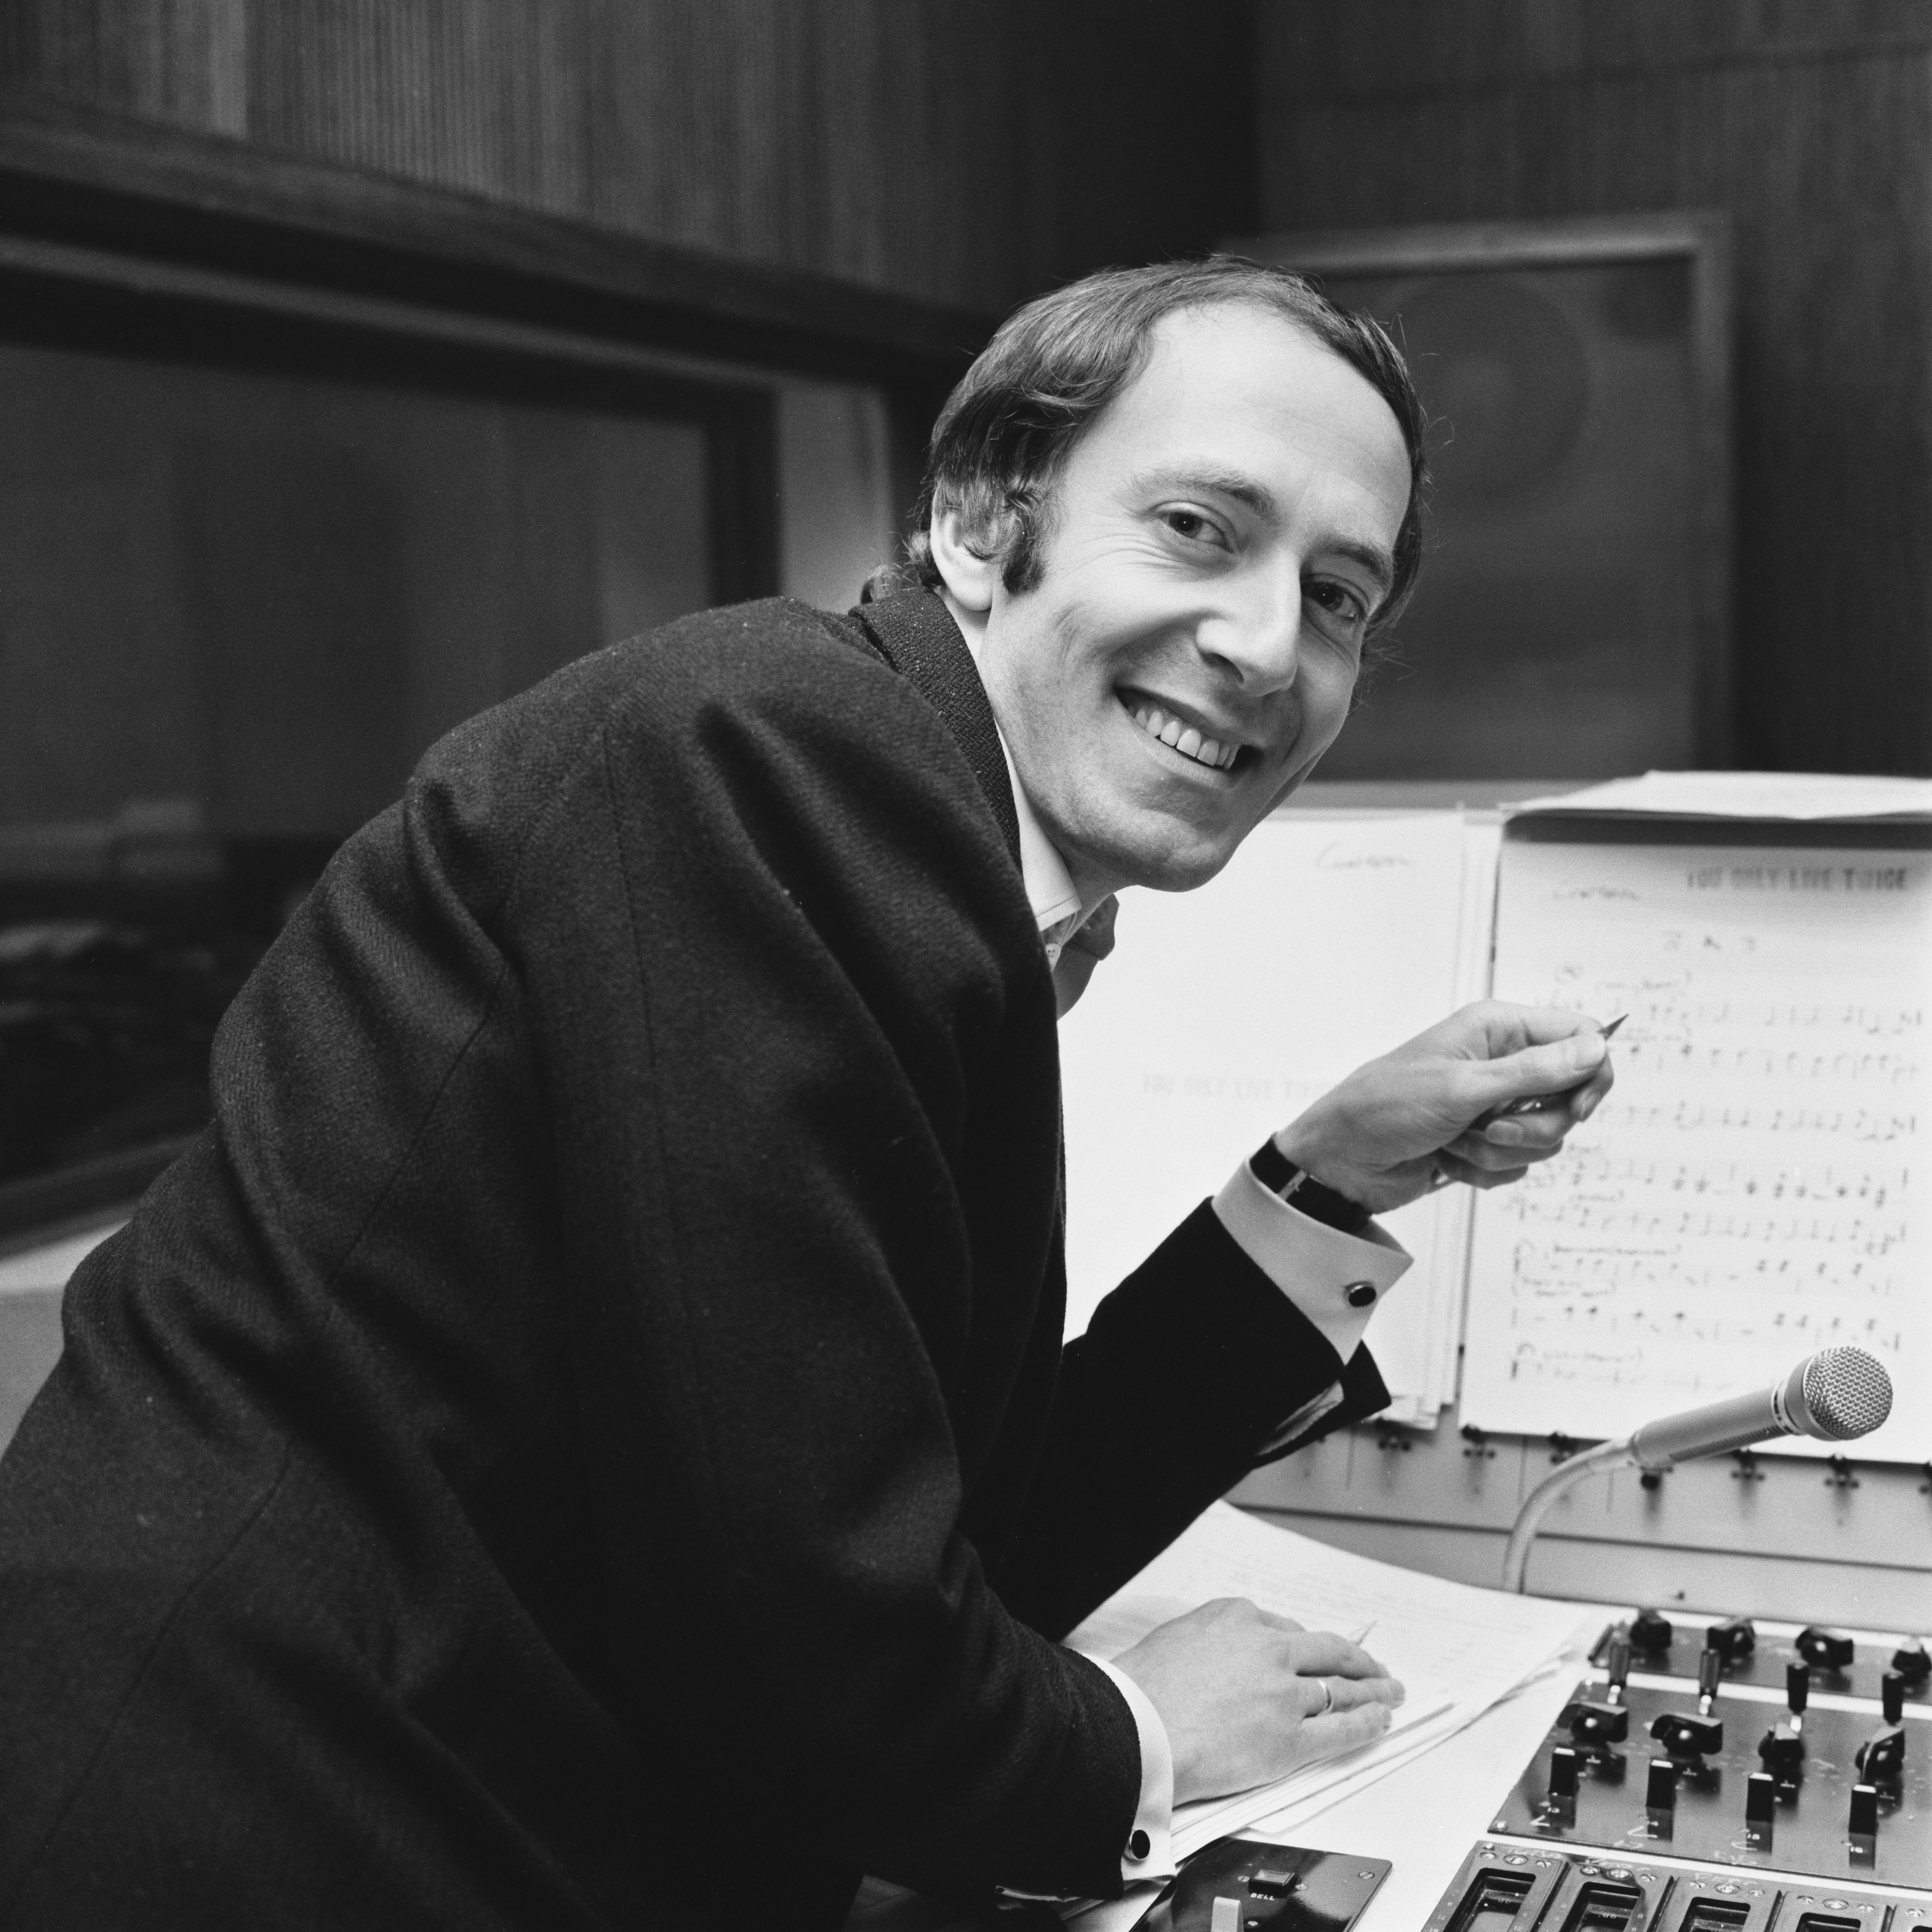 John Barry records the theme song for the James Bond film "You Only Live Twice," in April 1967 in London. | Source: Getty Images